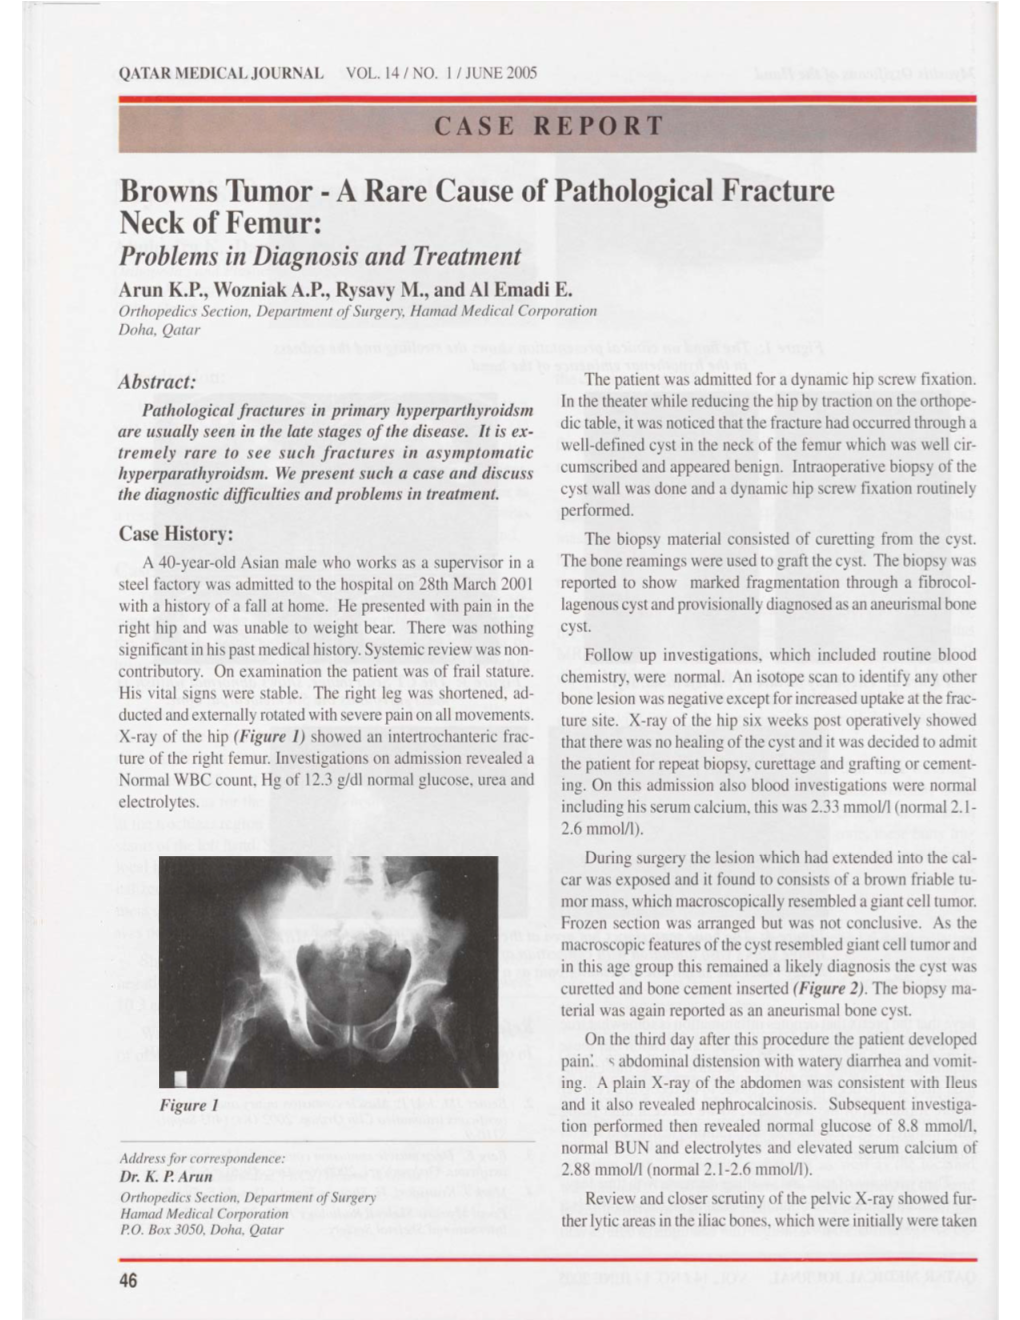 Browns Tumor - a Rare Cause of Pathological Fracture Neck of Femur: Problems in Diagnosis and Treatment Arun K.P., Wozniak A.P., Rysavy M., and Al Emadi E